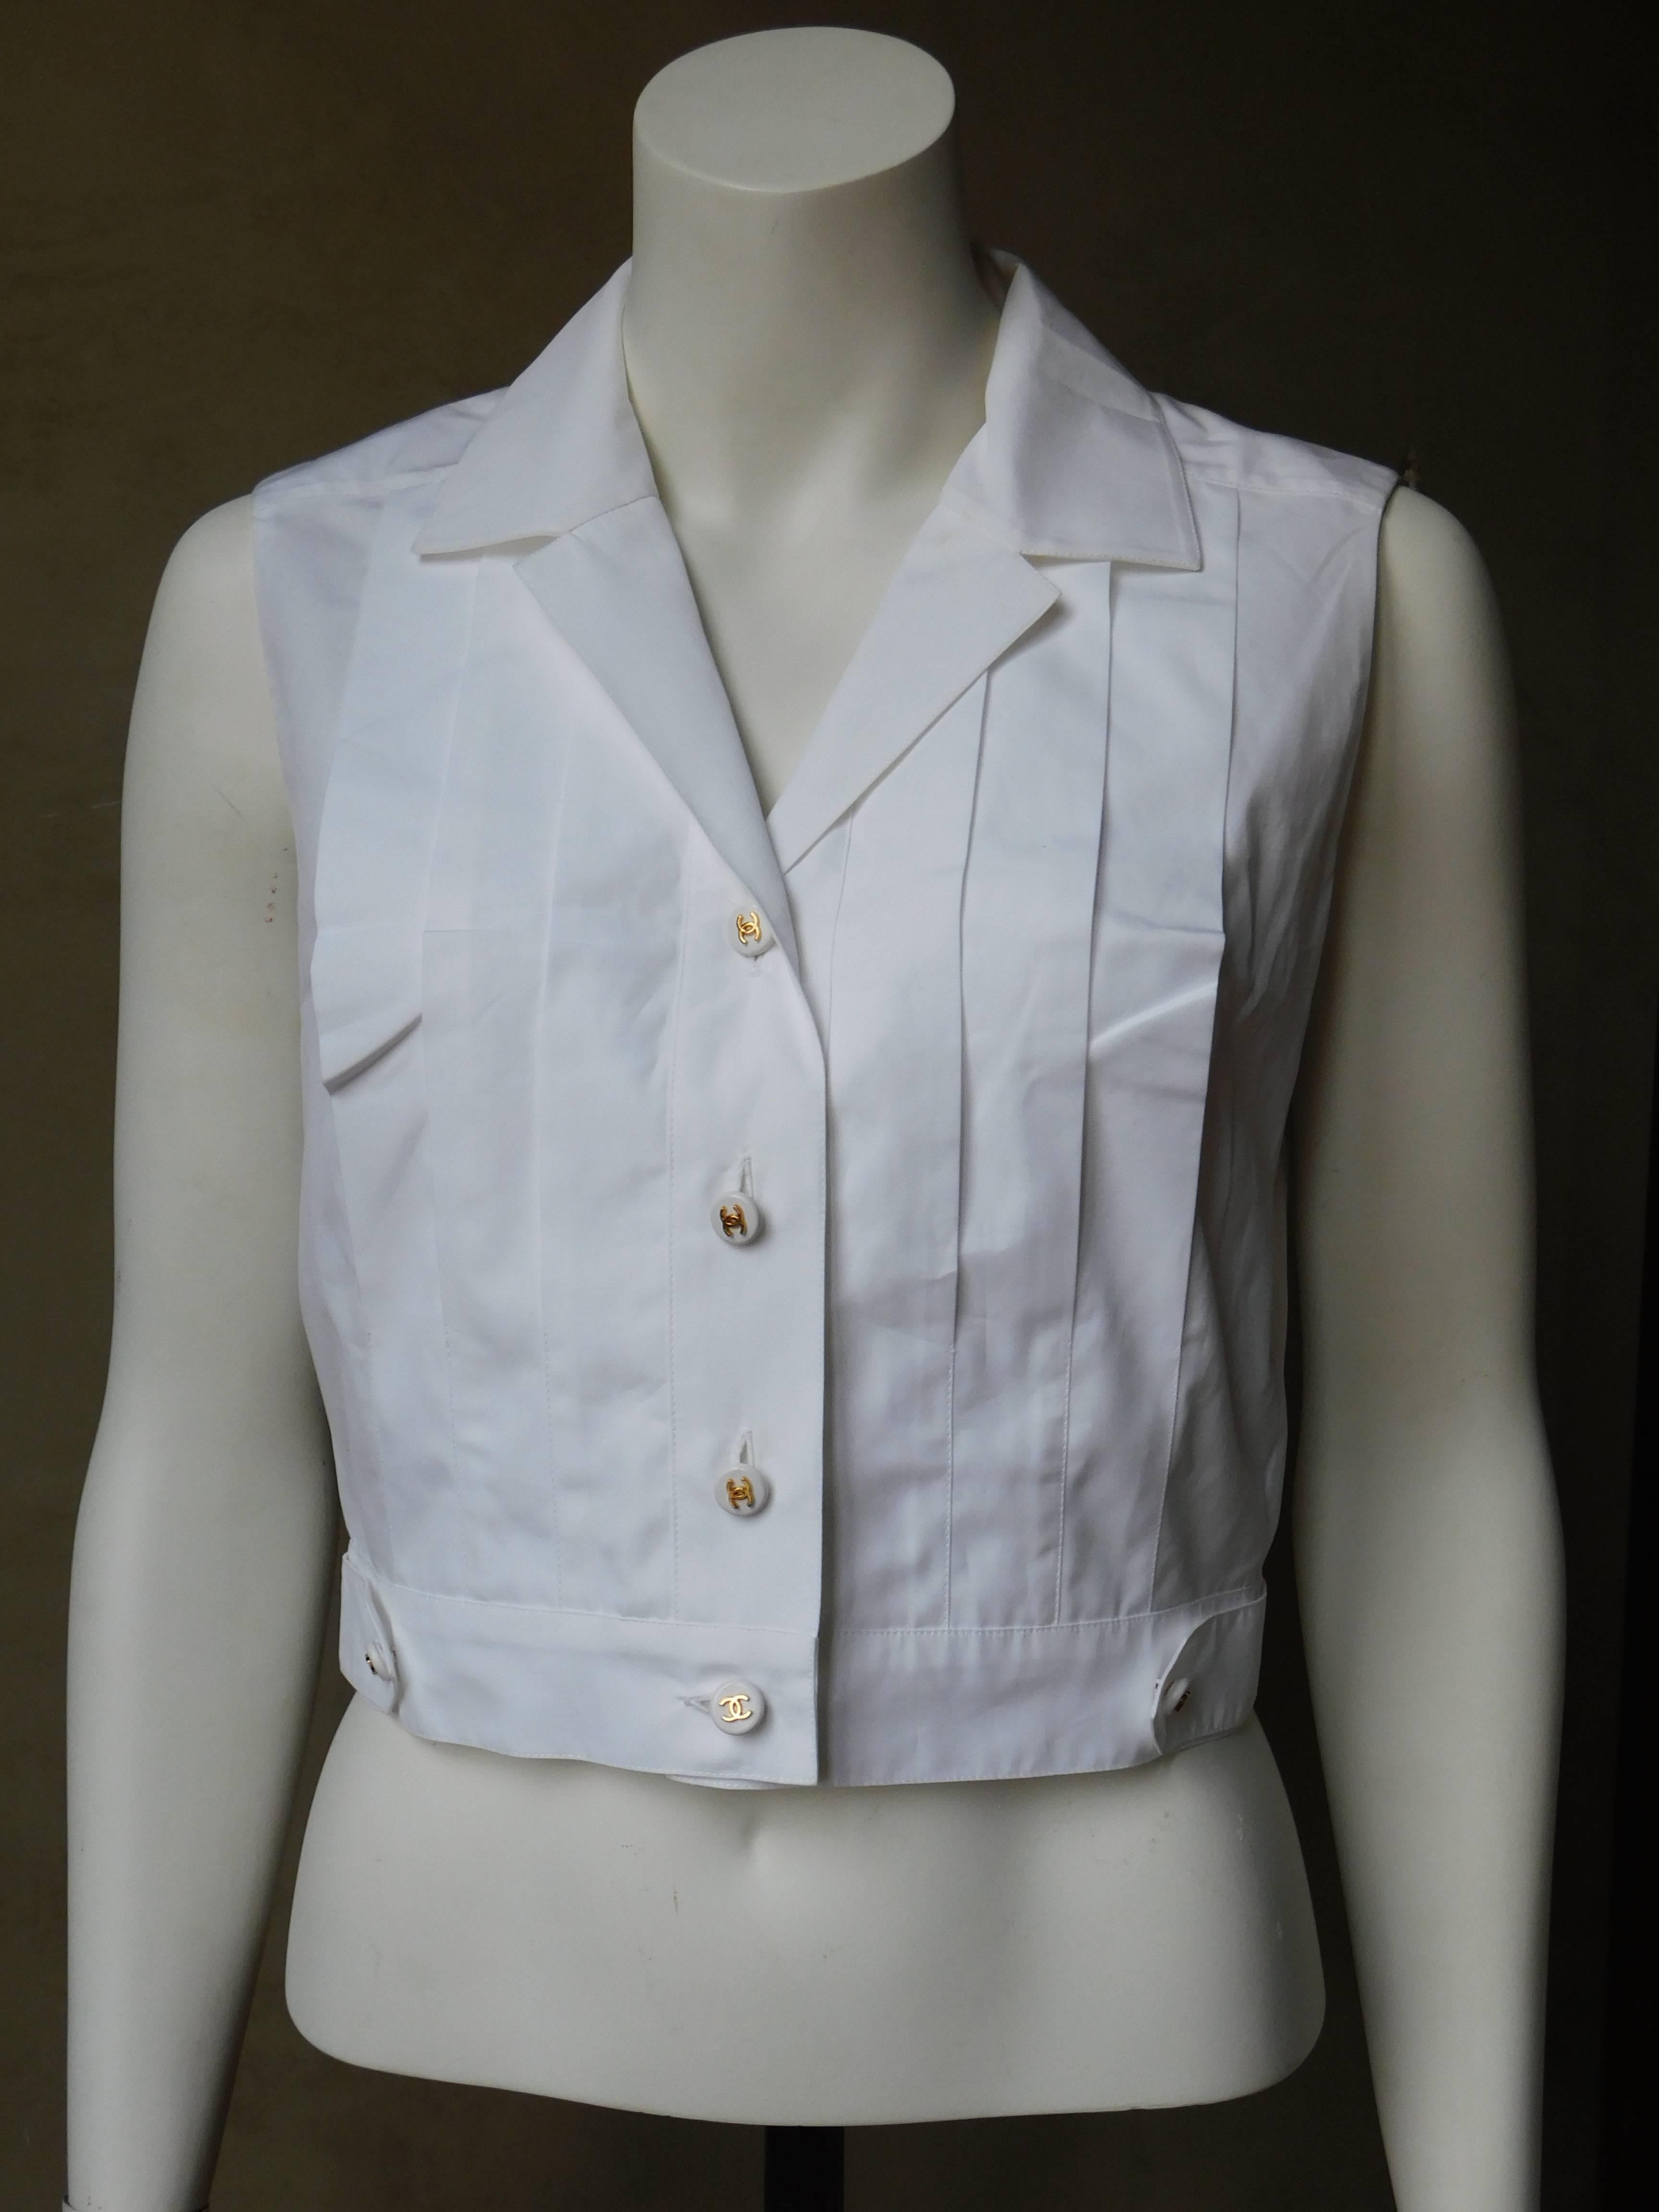 Crisp white cotton Chanel Boutique button front pleated sleeveless shirt. Chic slightly cropped fit with buttoned waist band. In very good condition.
Chanel Spring 1997 collection